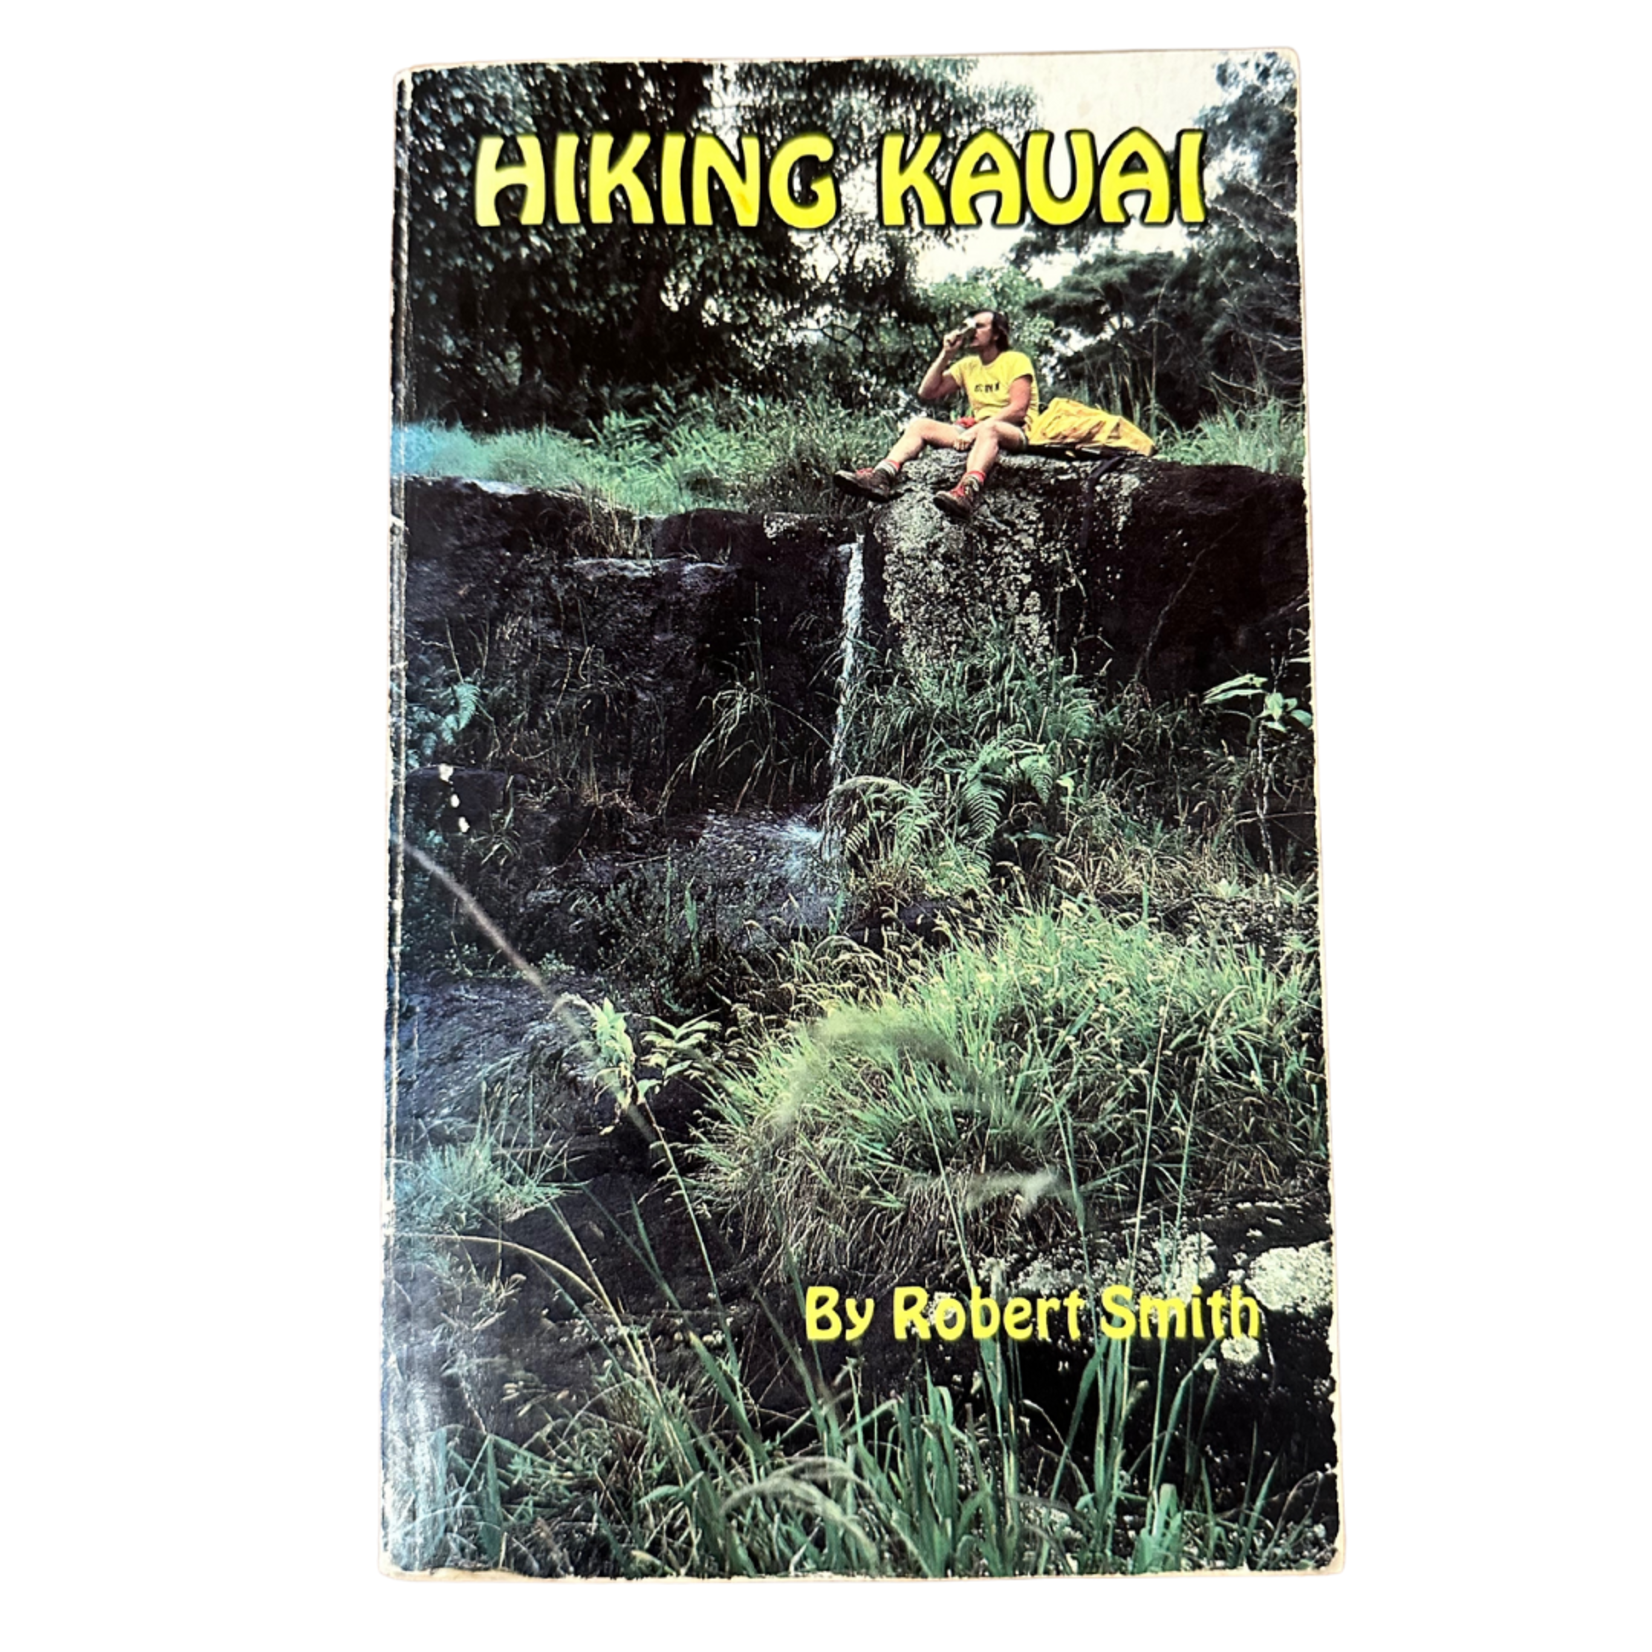 Mission Zero ReLoved Book - Robert Smith - Hiking Kauai (4th Edition 1989)